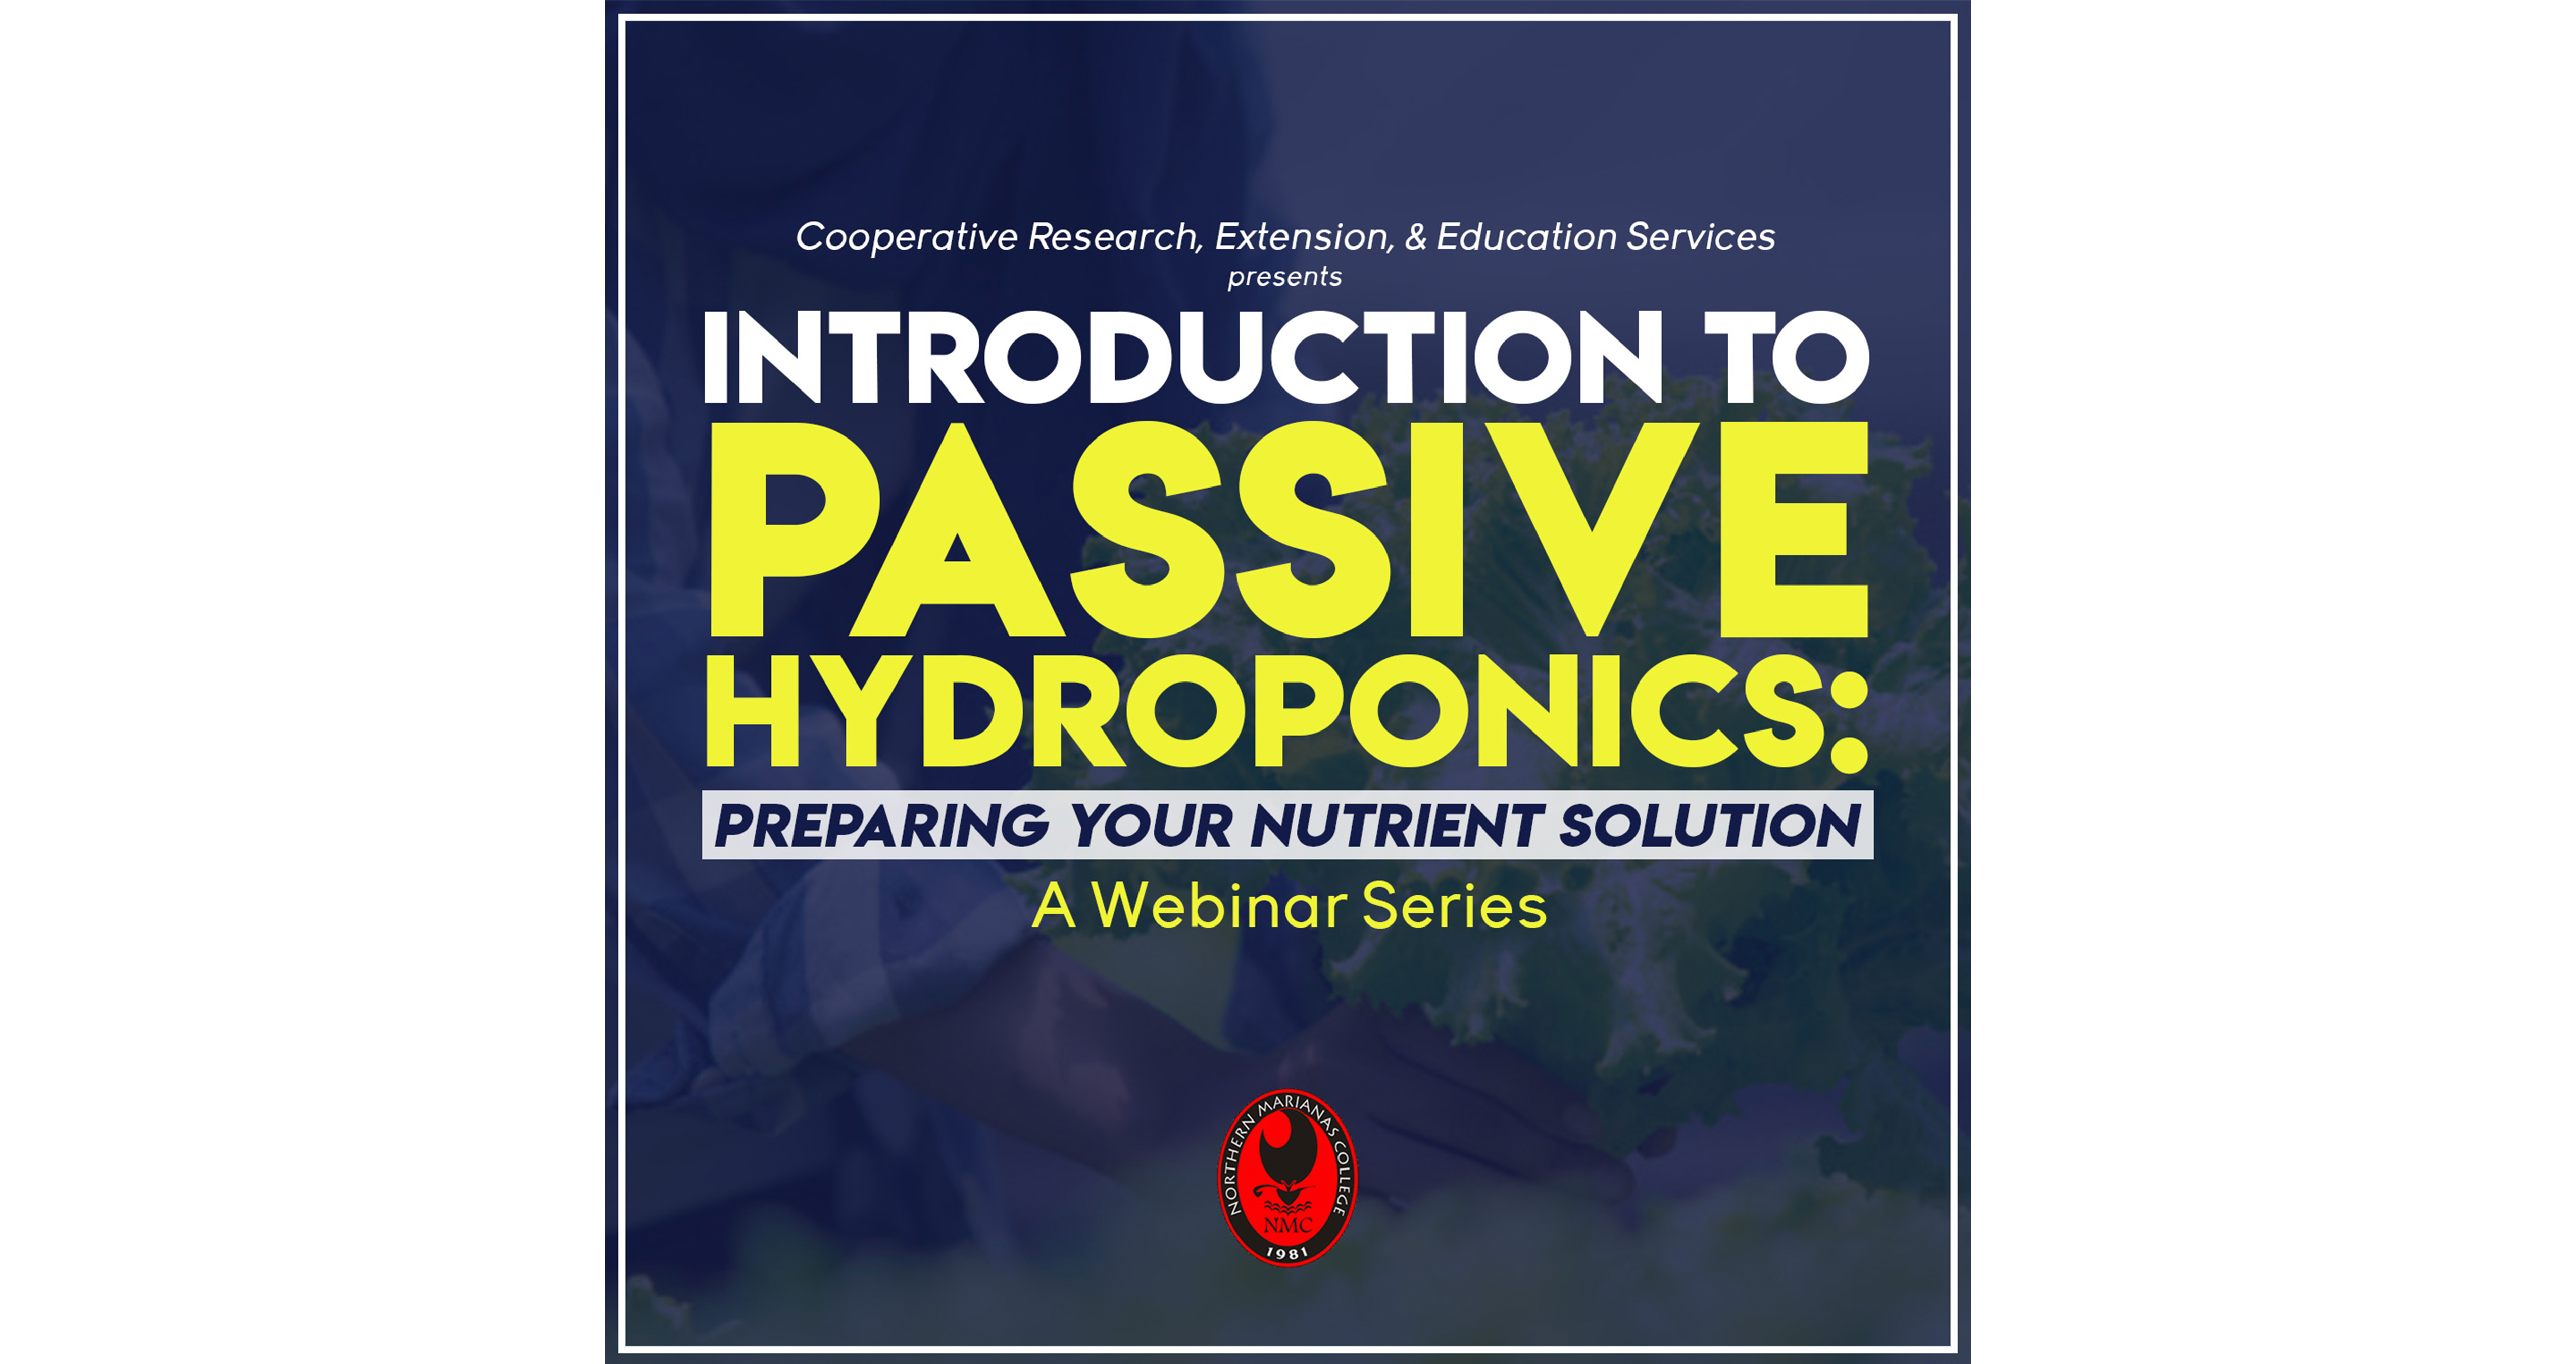 Introduction to Passive Hydroponics